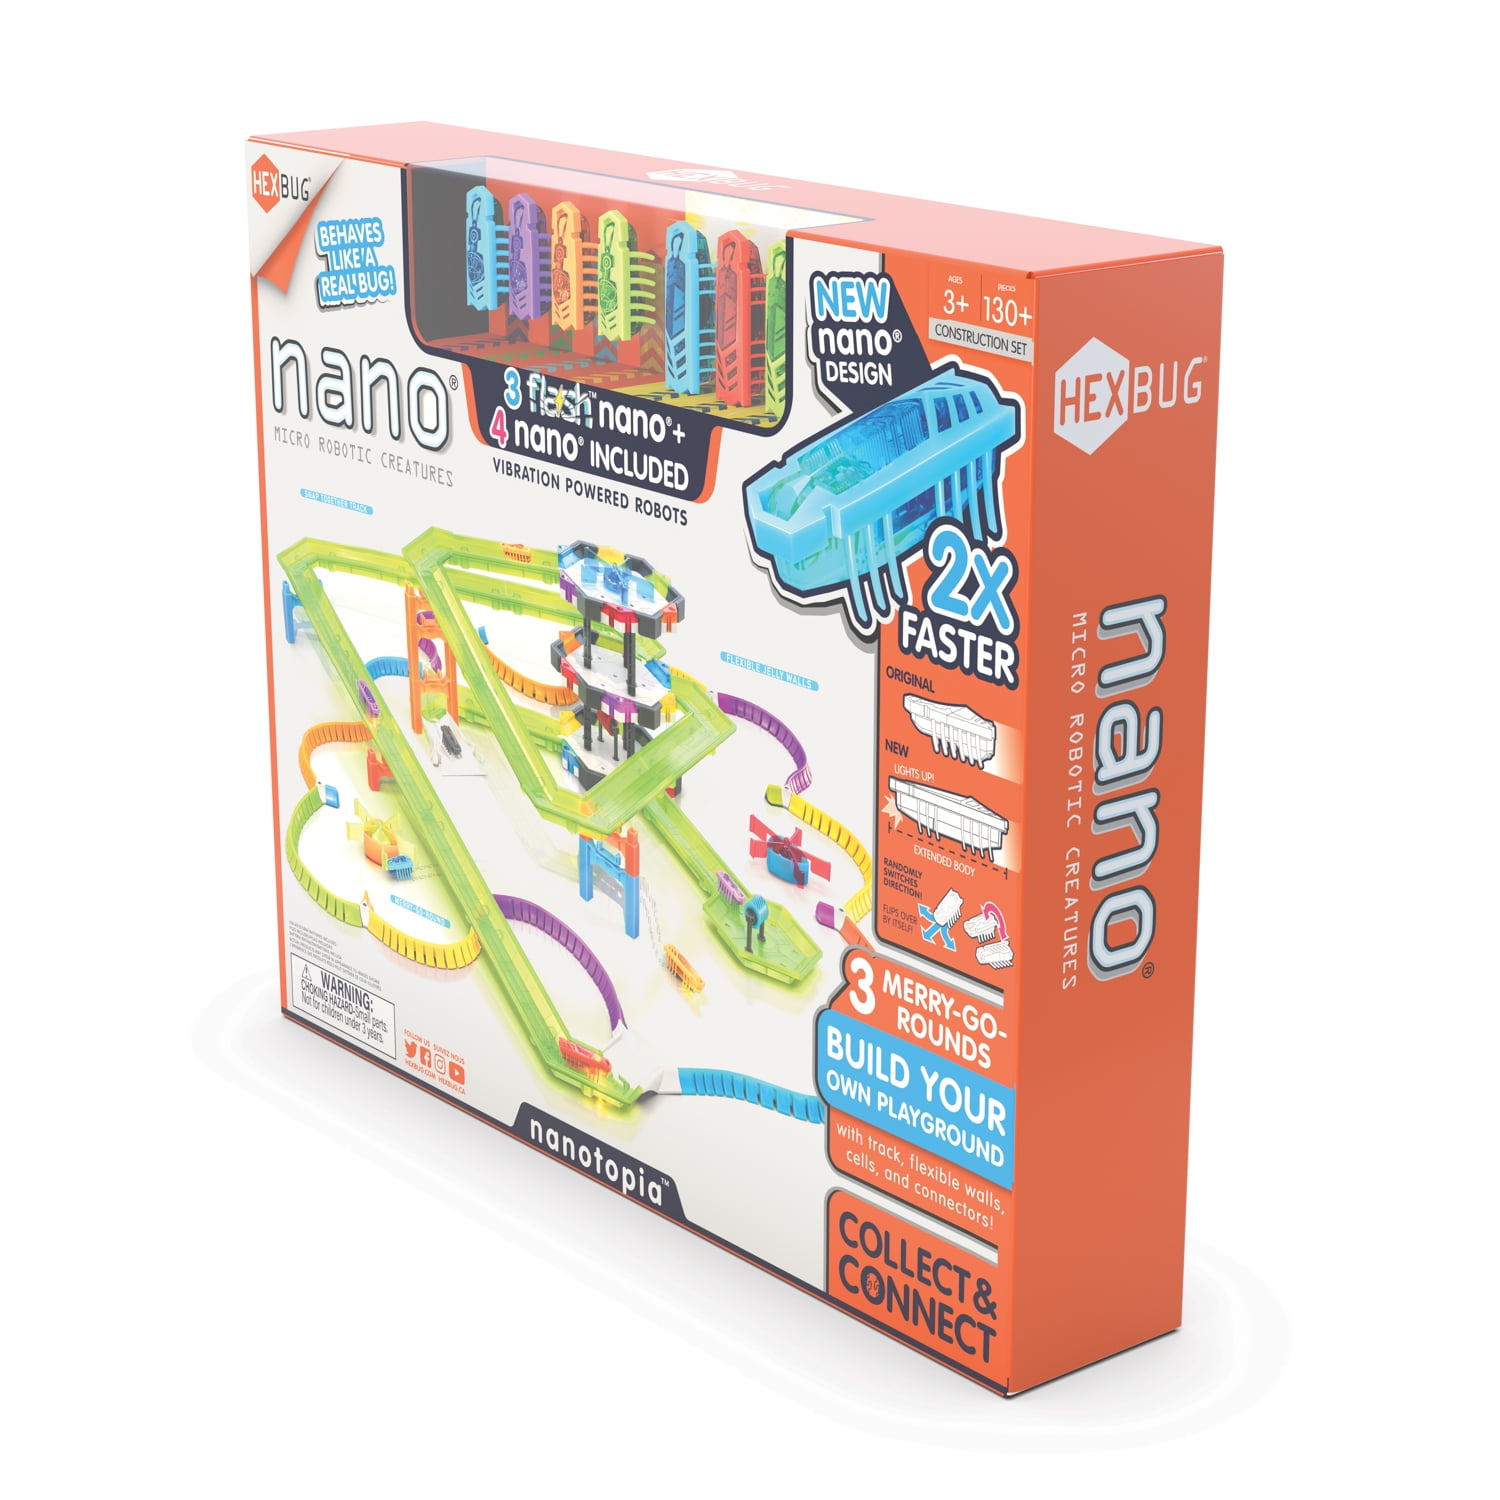 Over 130 Pieces and Batteries Included Colorful Sensory Playset for Kids Build Your Own Playground HEXBUG Flash Nano nanotopia 